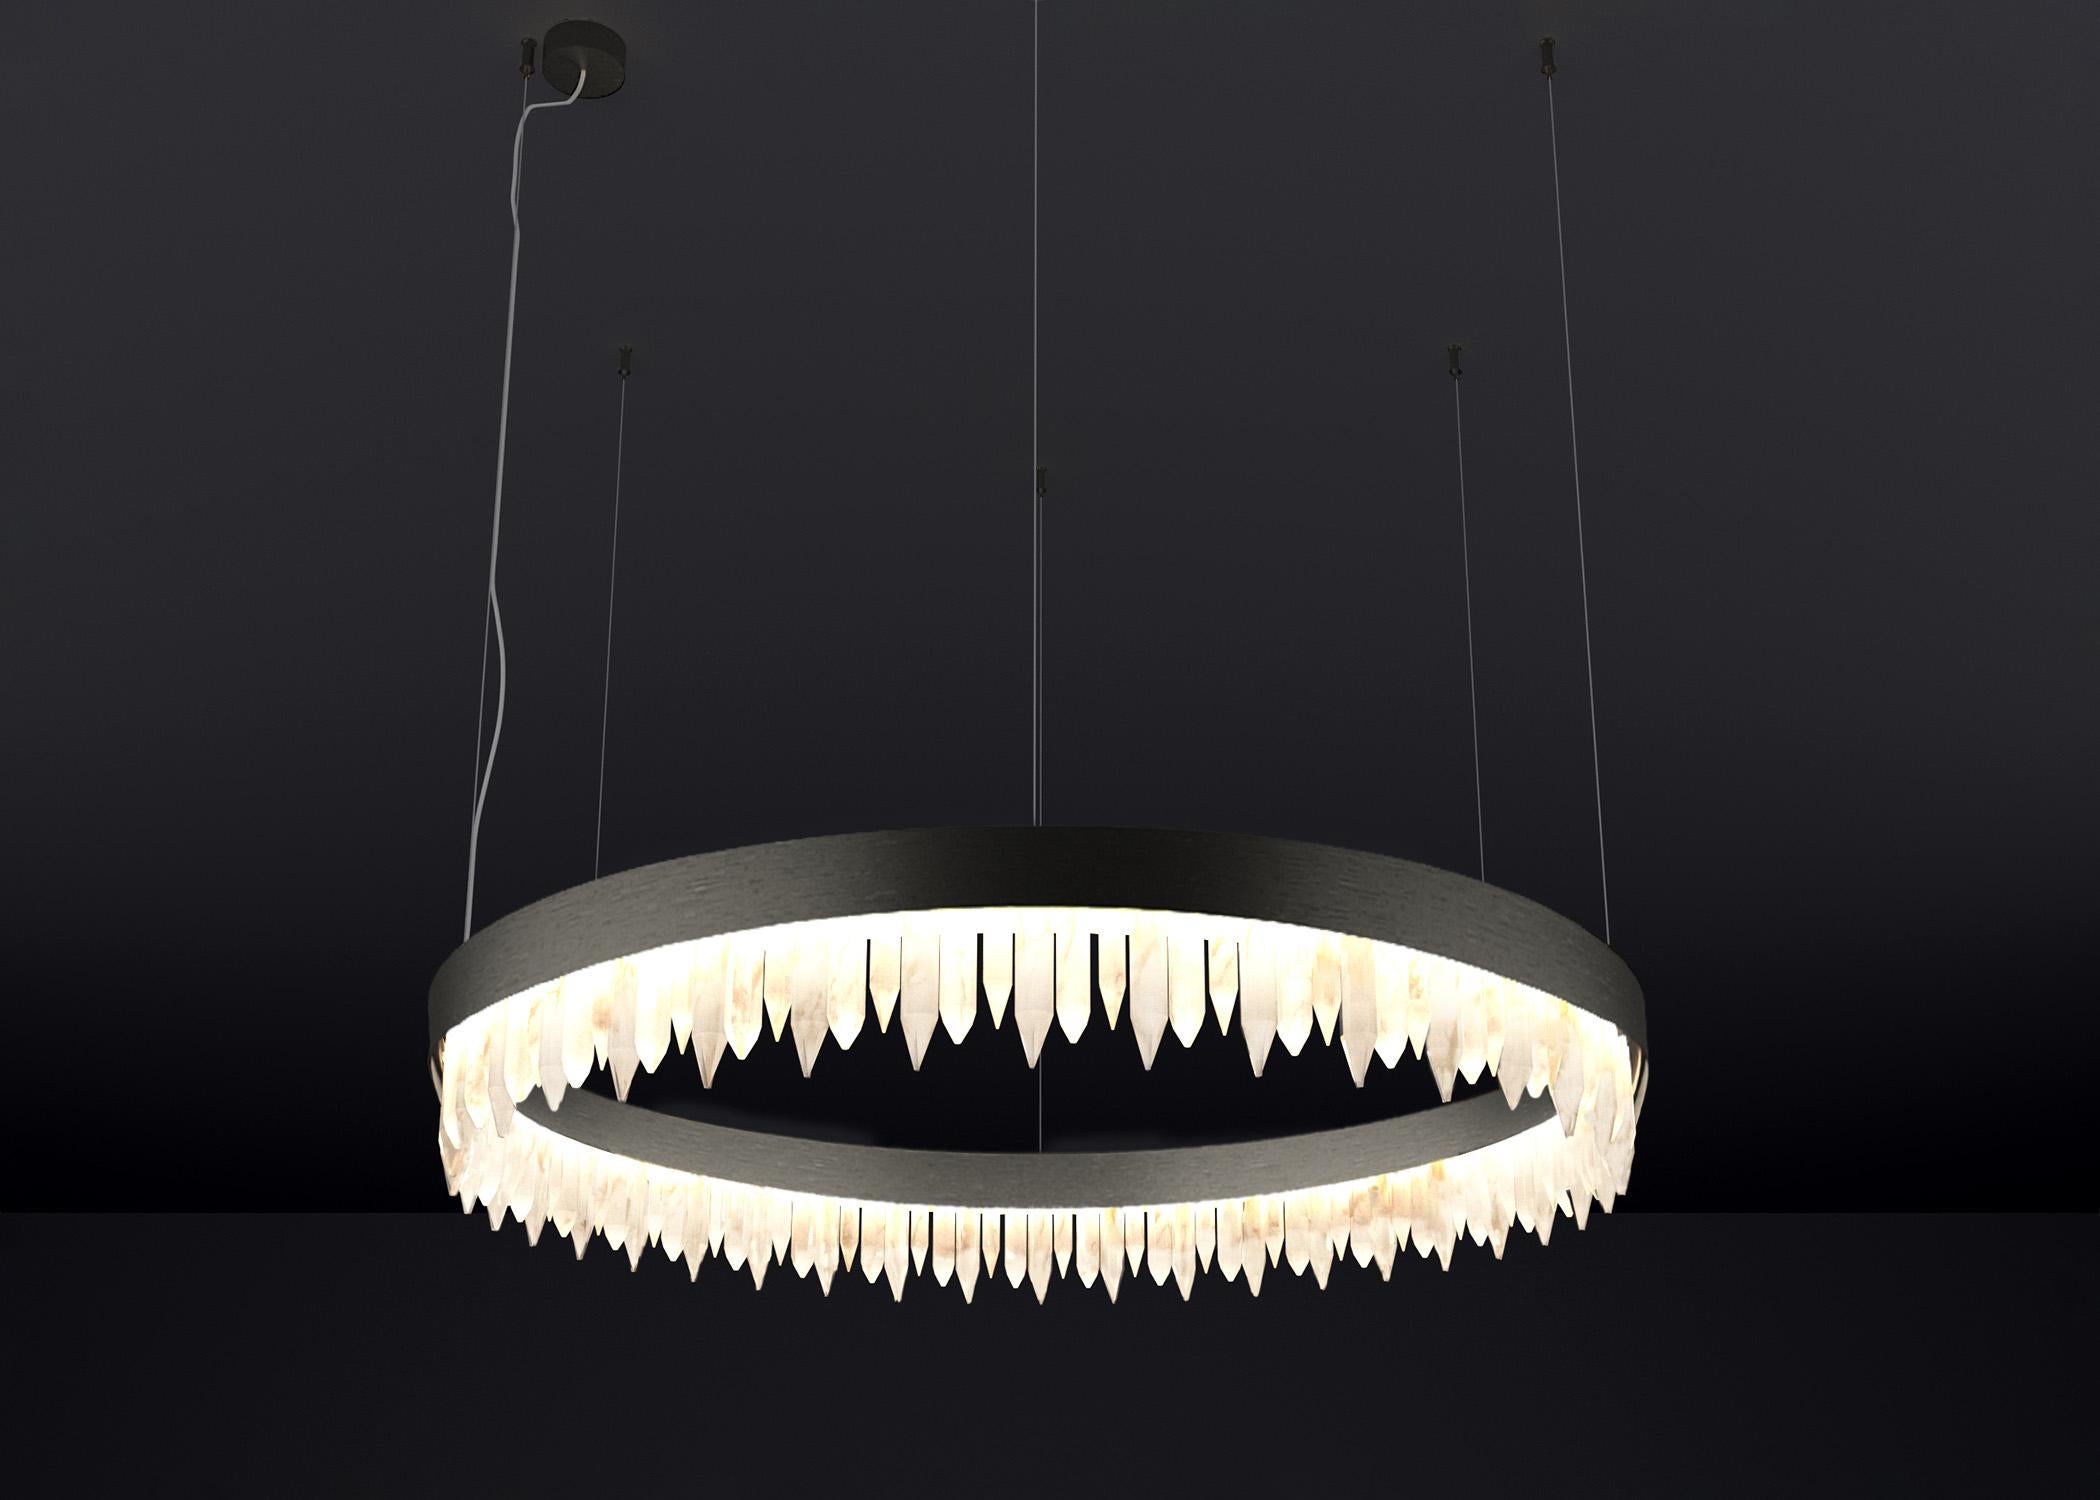 Urano Brushed Black 60 Pendant Light 1 by Alabastro Italiano
Dimensions: Ø 60 x H 20 cm.
Materials: Glass and brushed black metal.

2 x Strip LED, 81 Watt 8121 Lumen, 24 V, 3000 K

Available in different sizes: Ø 60, Ø 80, Ø 100 and Ø 120 cm.